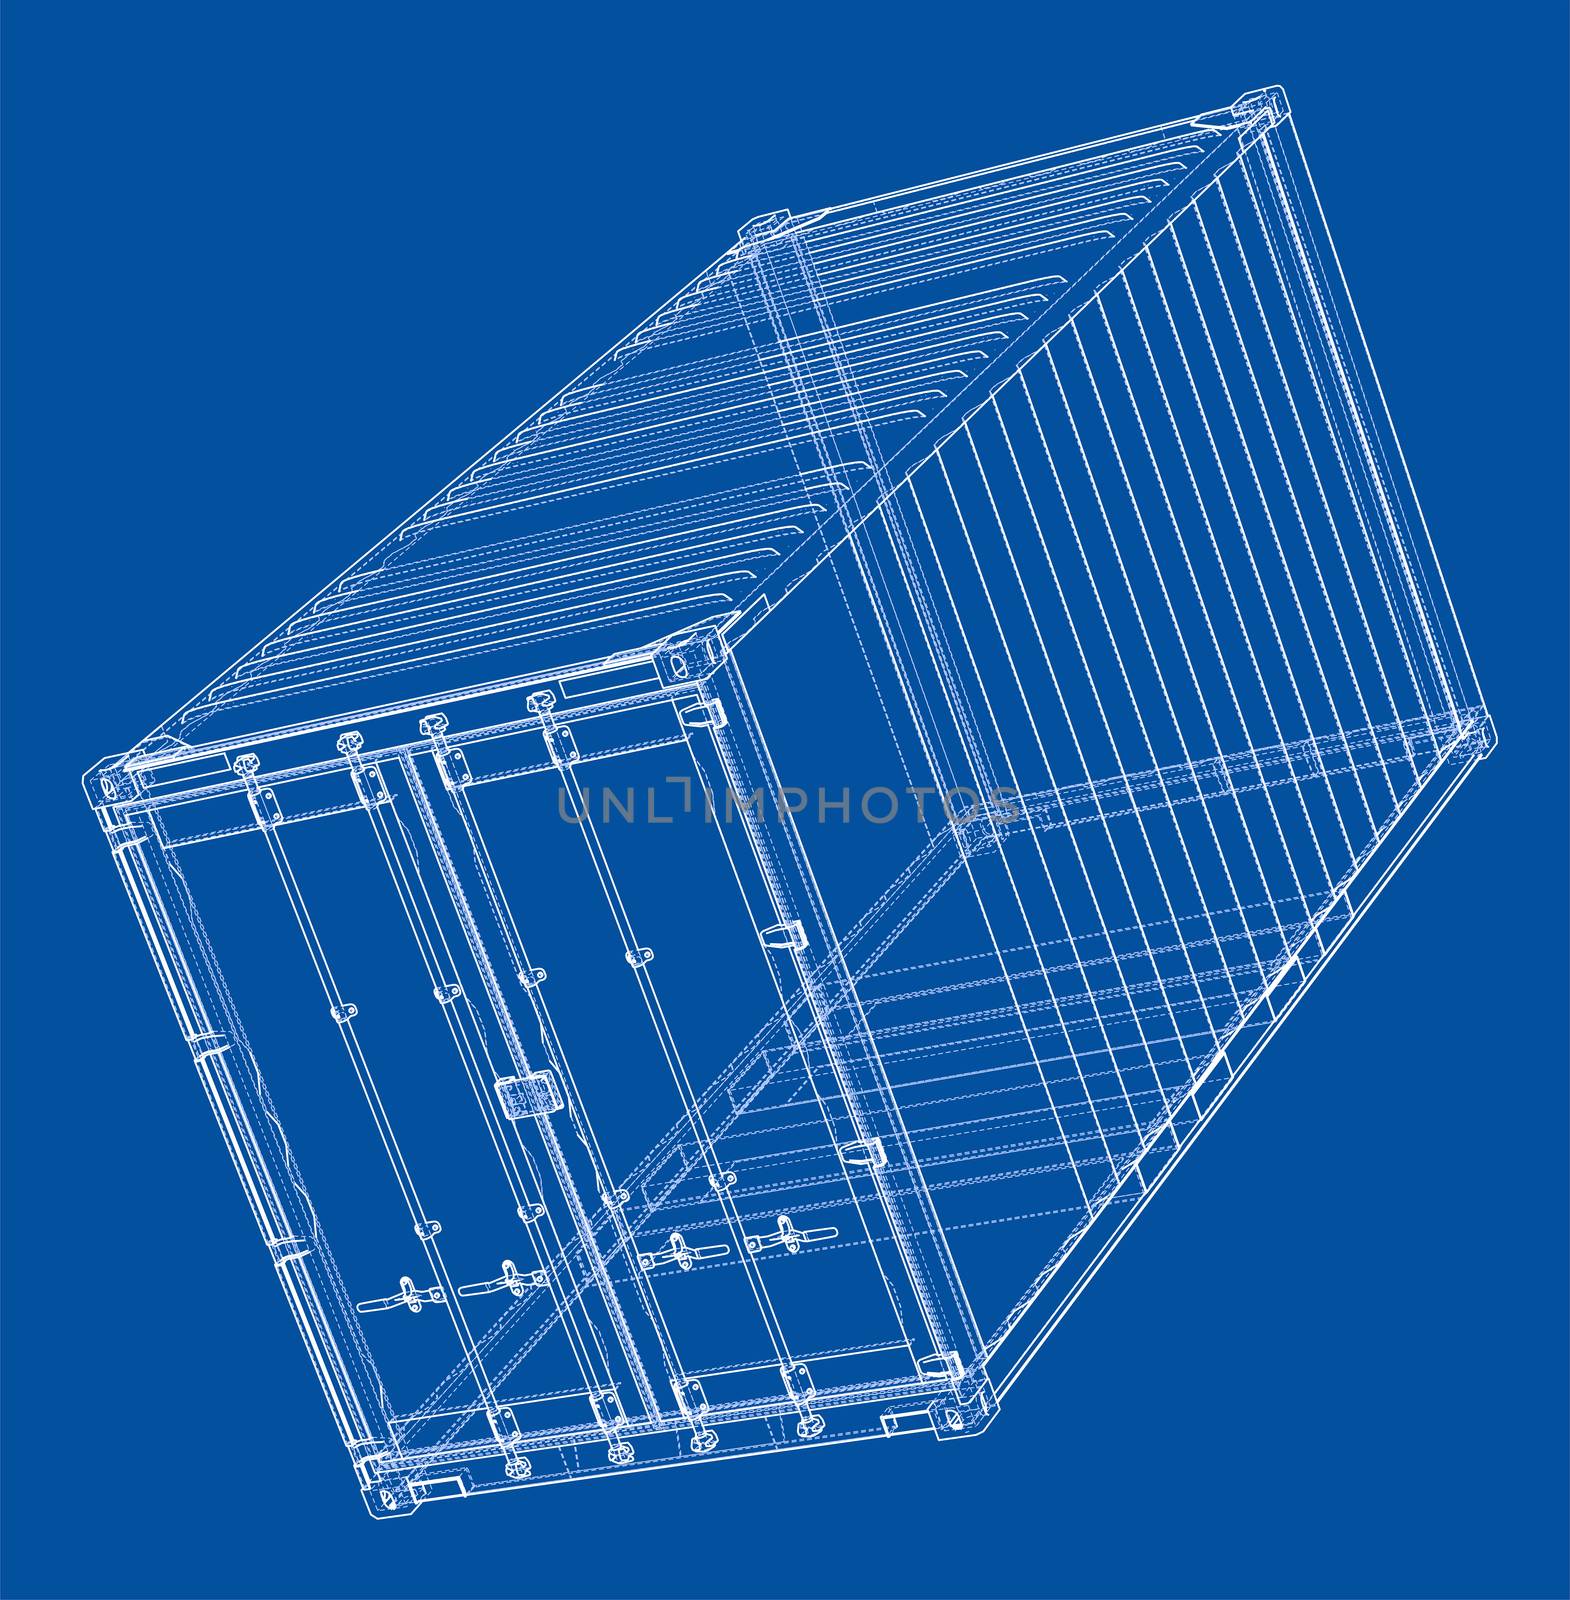 Cargo container blueprint. Wire-frame style. 3d illustration